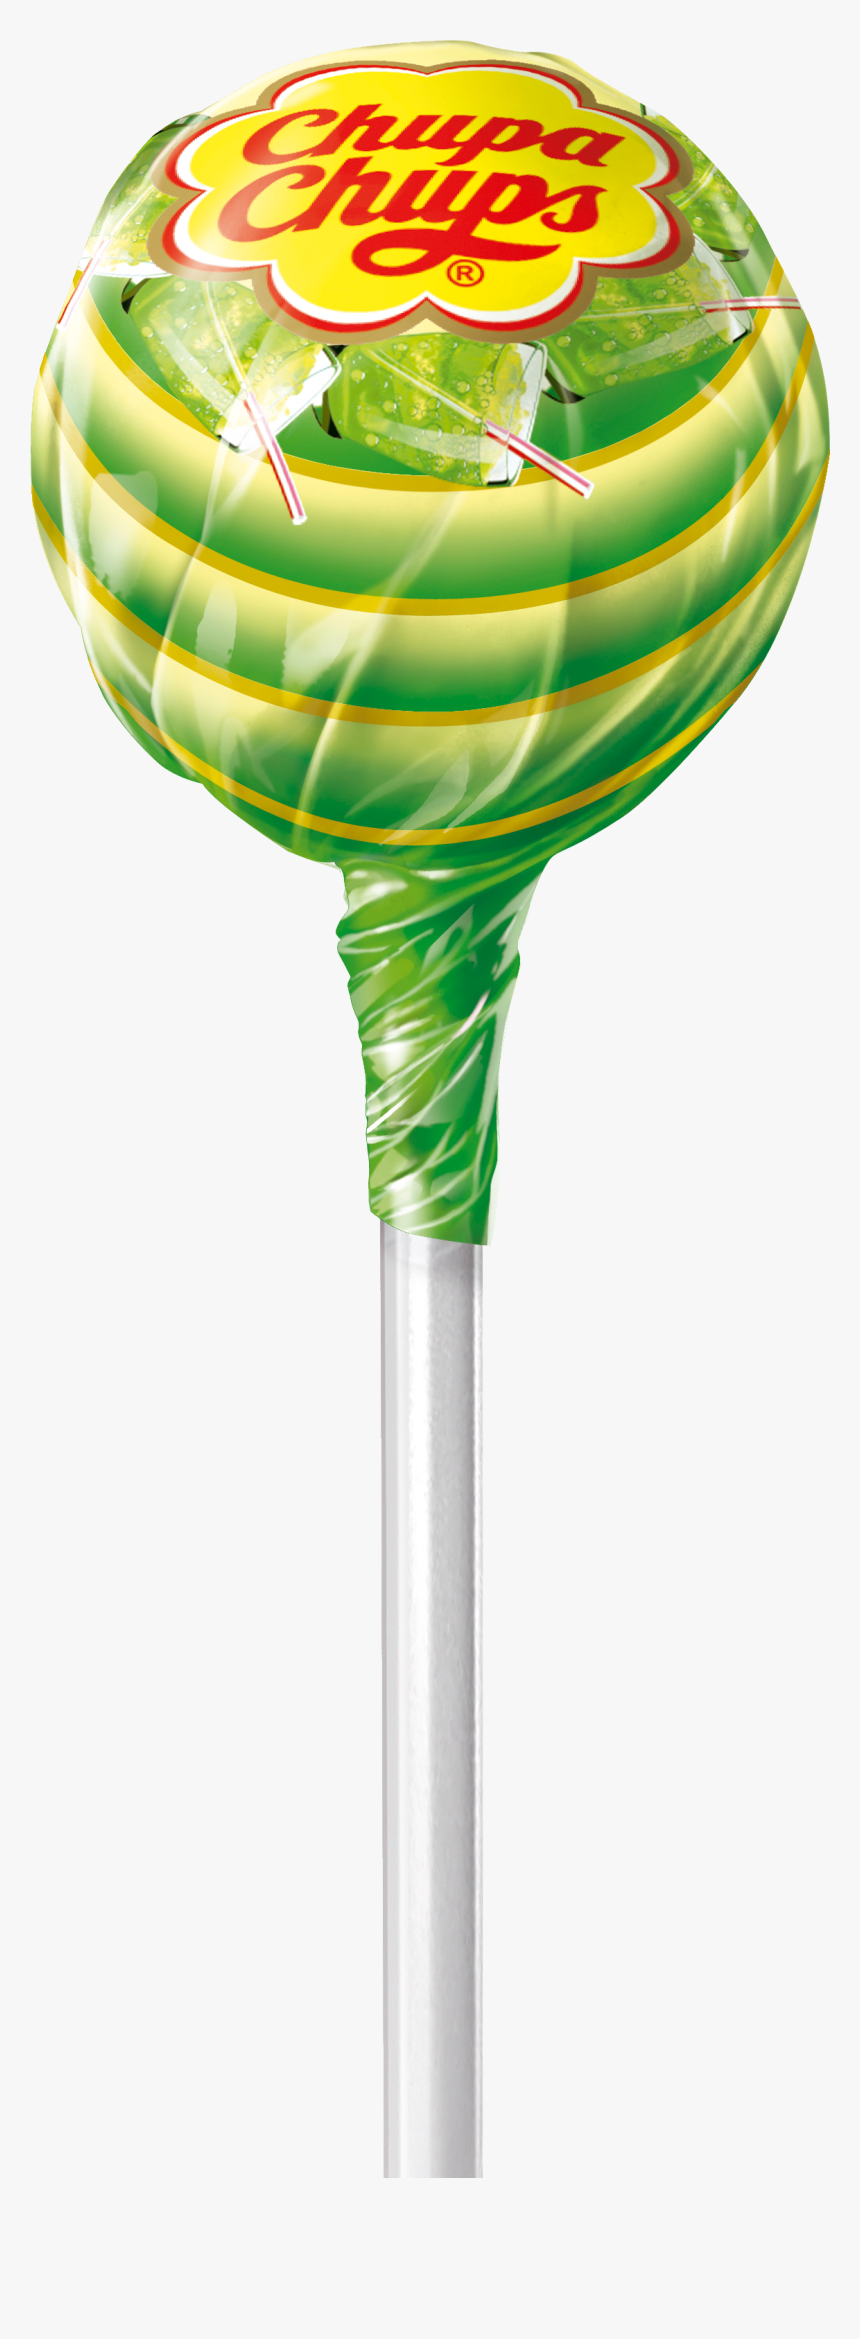 Free Download Of Lollipop Png Picture - Chupa Chups Green Apple, Transparent Png, Free Download